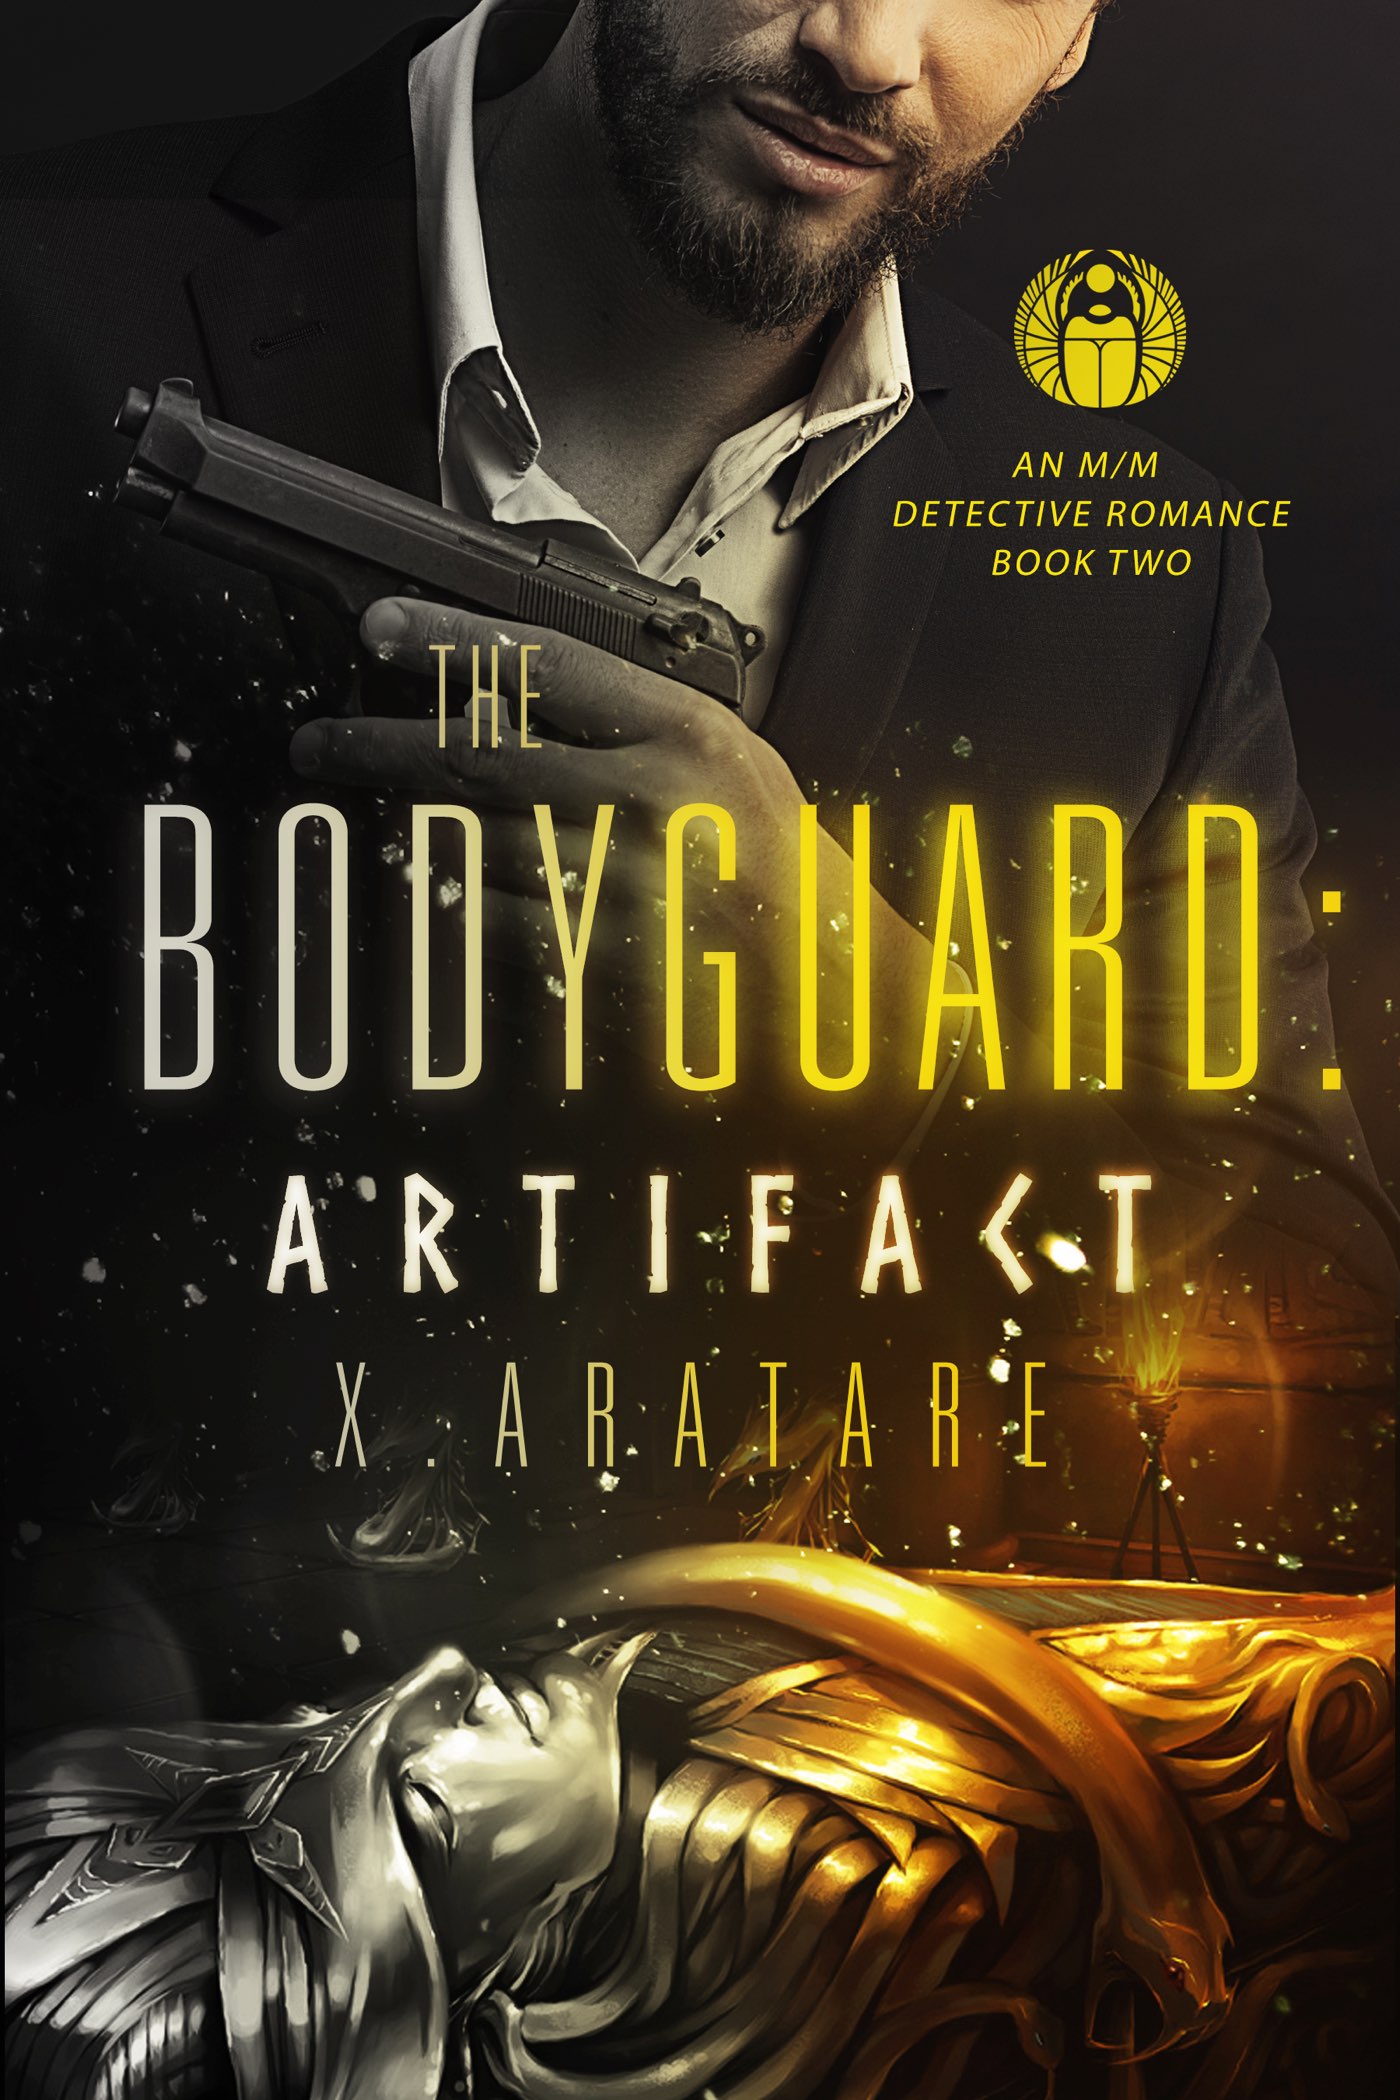 The Artifact Book 2 The Bodyguard Multiple Formats